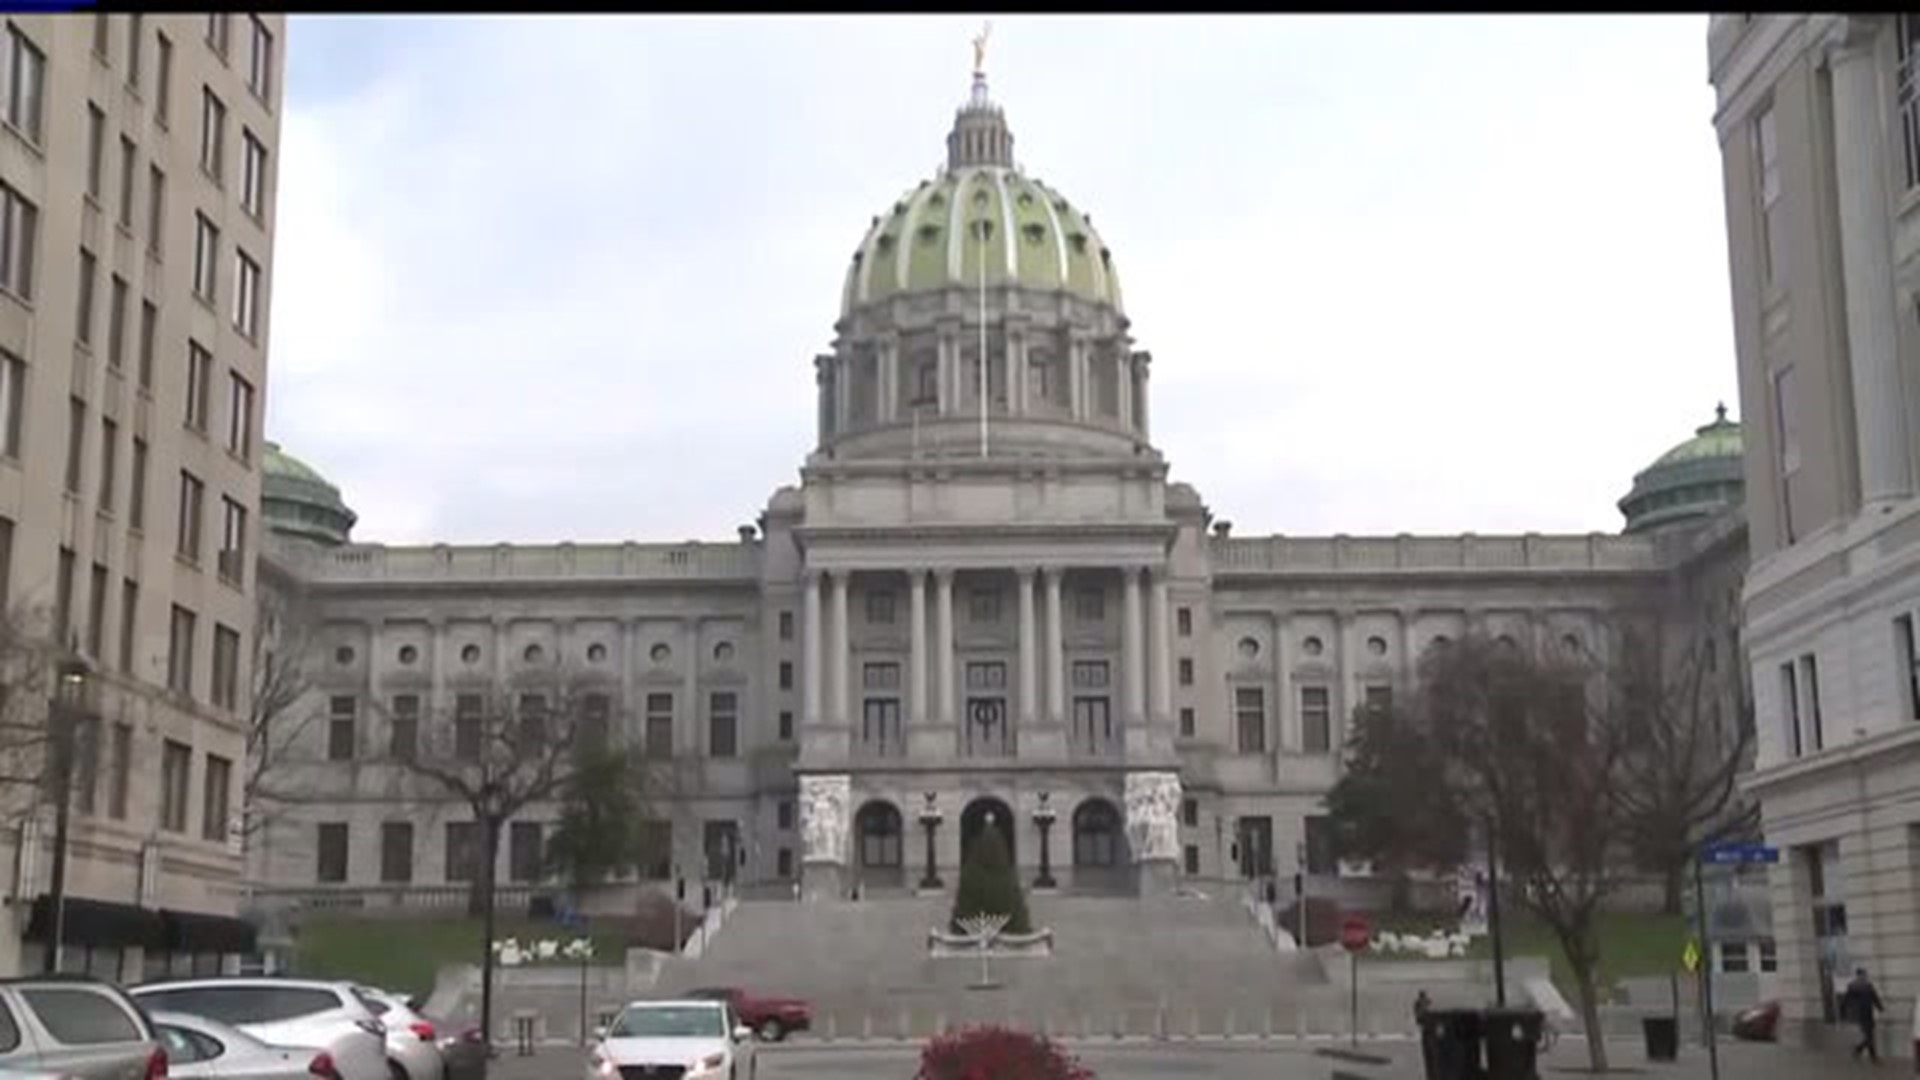 Latest on the State Budget